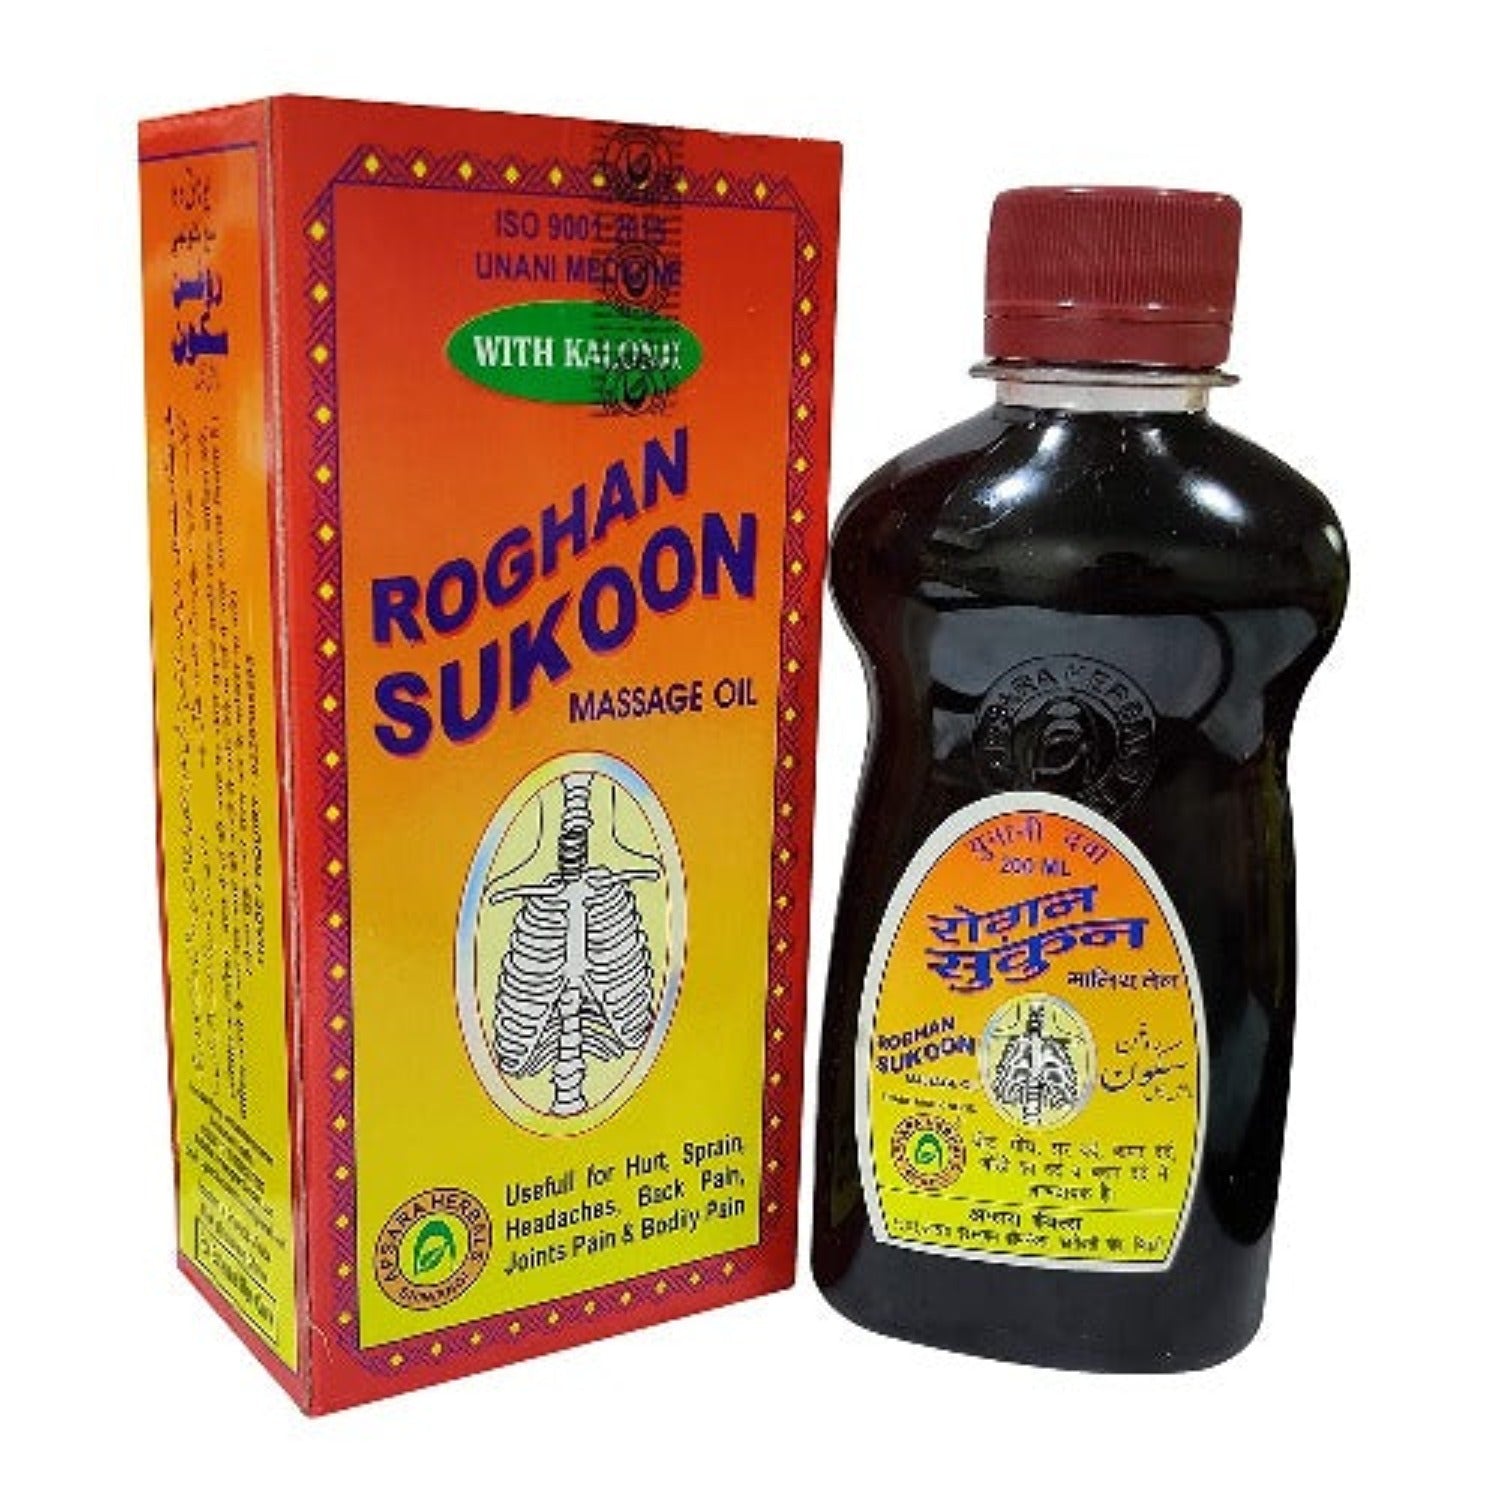 Apsara Unani Medicine With Kalonji Roghan Sukoon Body Massage Color Red Oil Injuries,Sprains,Headache Back Pain Joint Aches Any More Oil